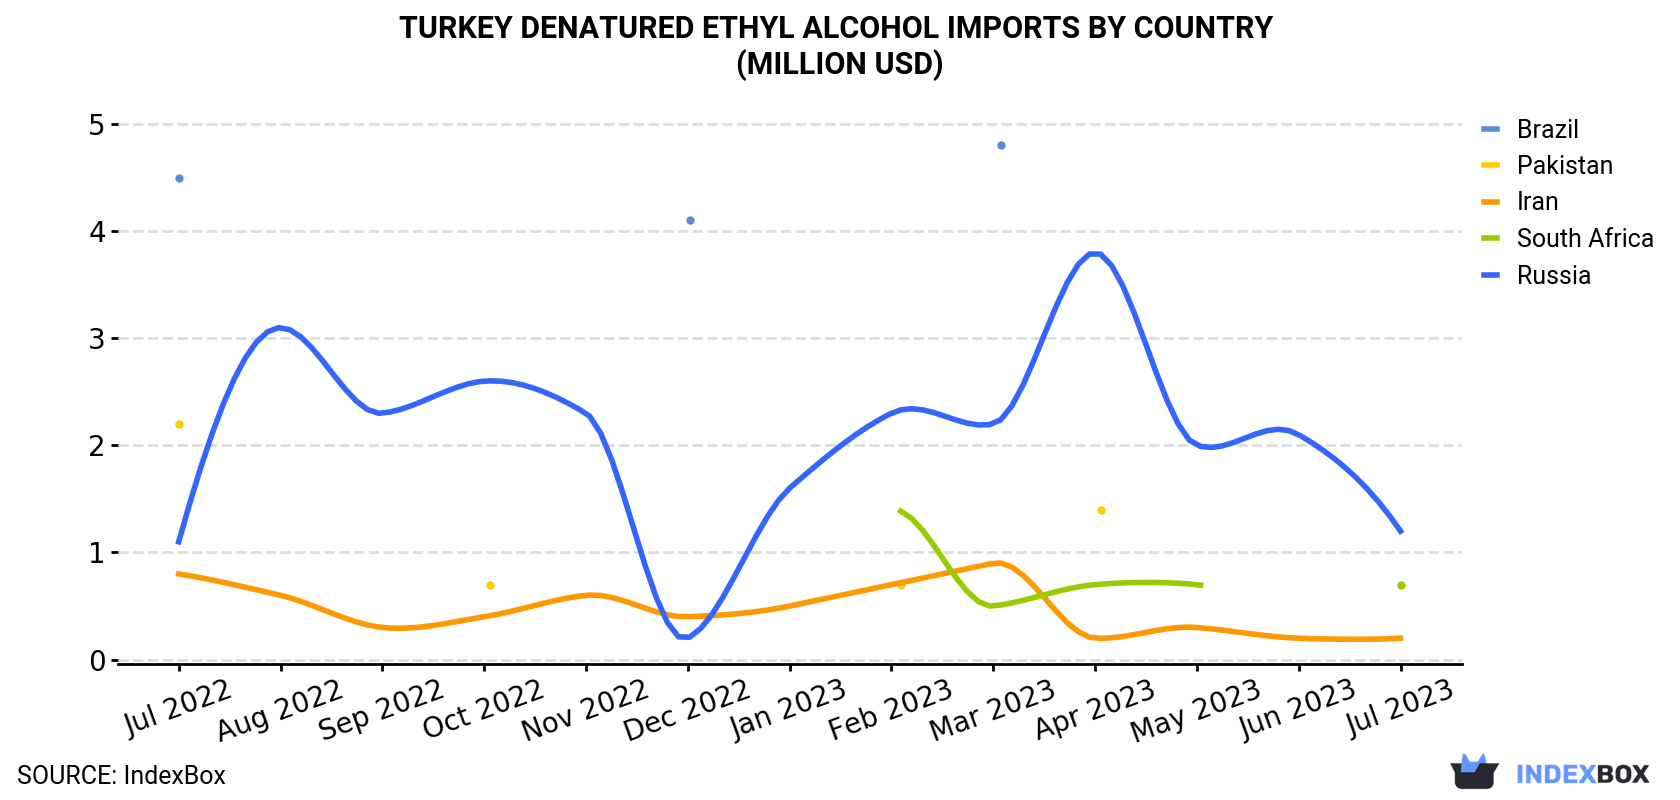 Turkey Denatured Ethyl Alcohol Imports By Country (Million USD)